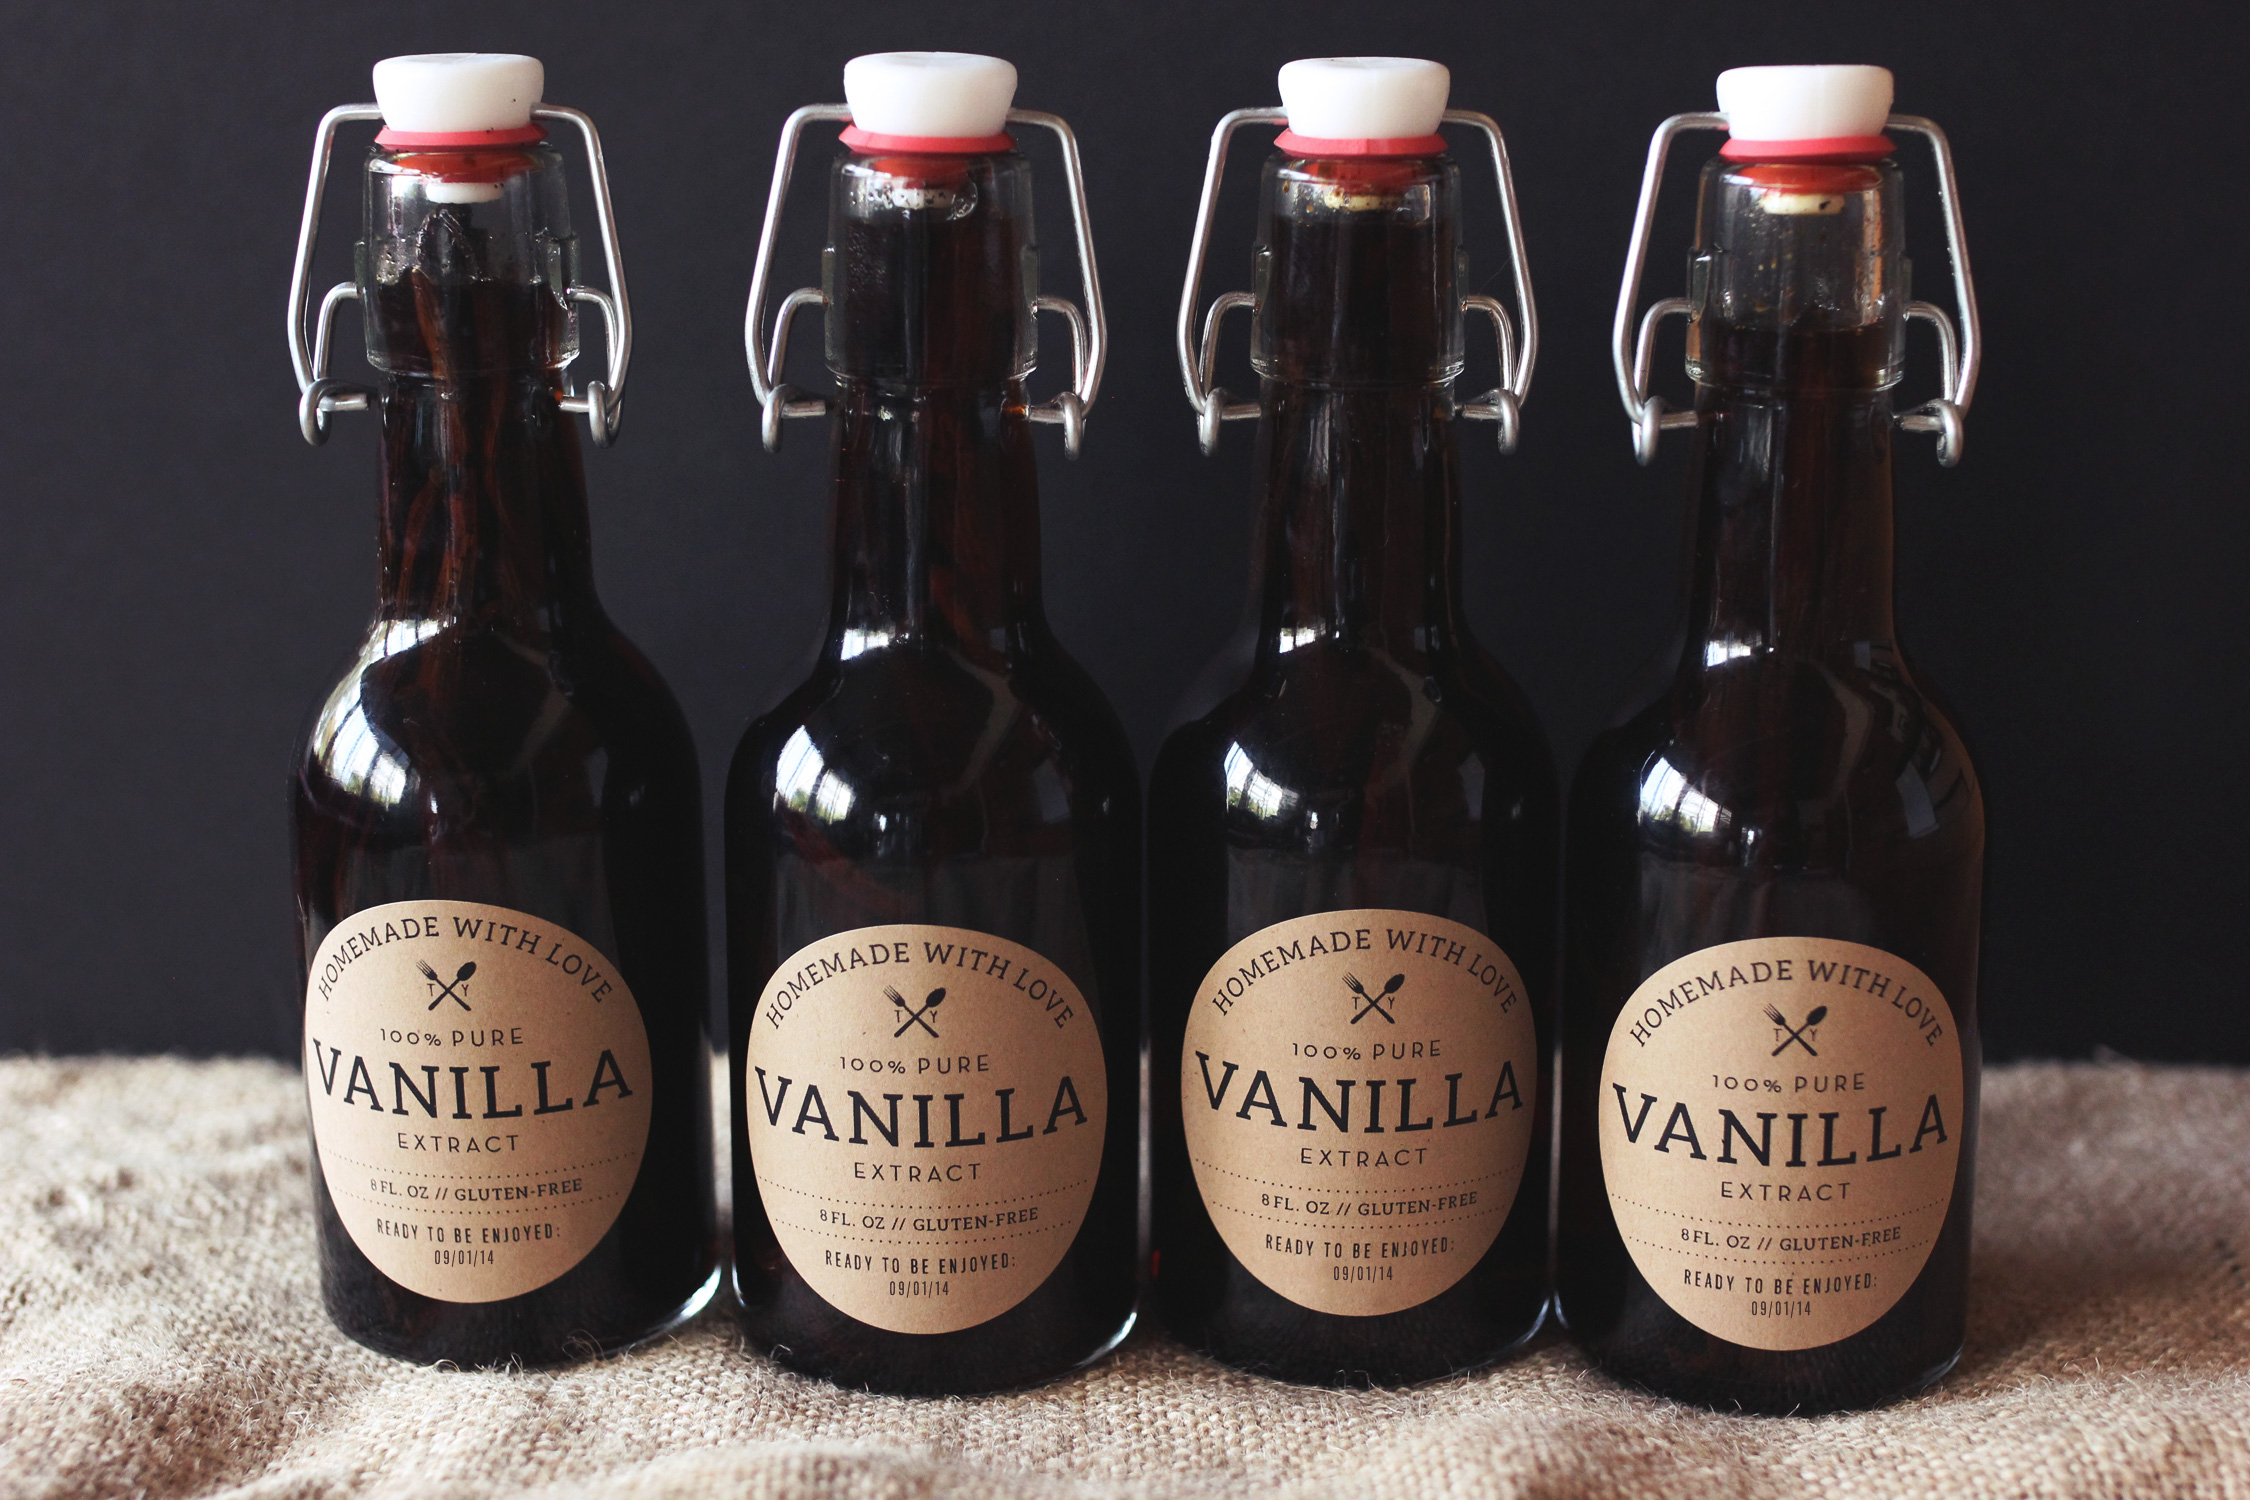 Can You Make Your Own Vanilla Extract at Home?